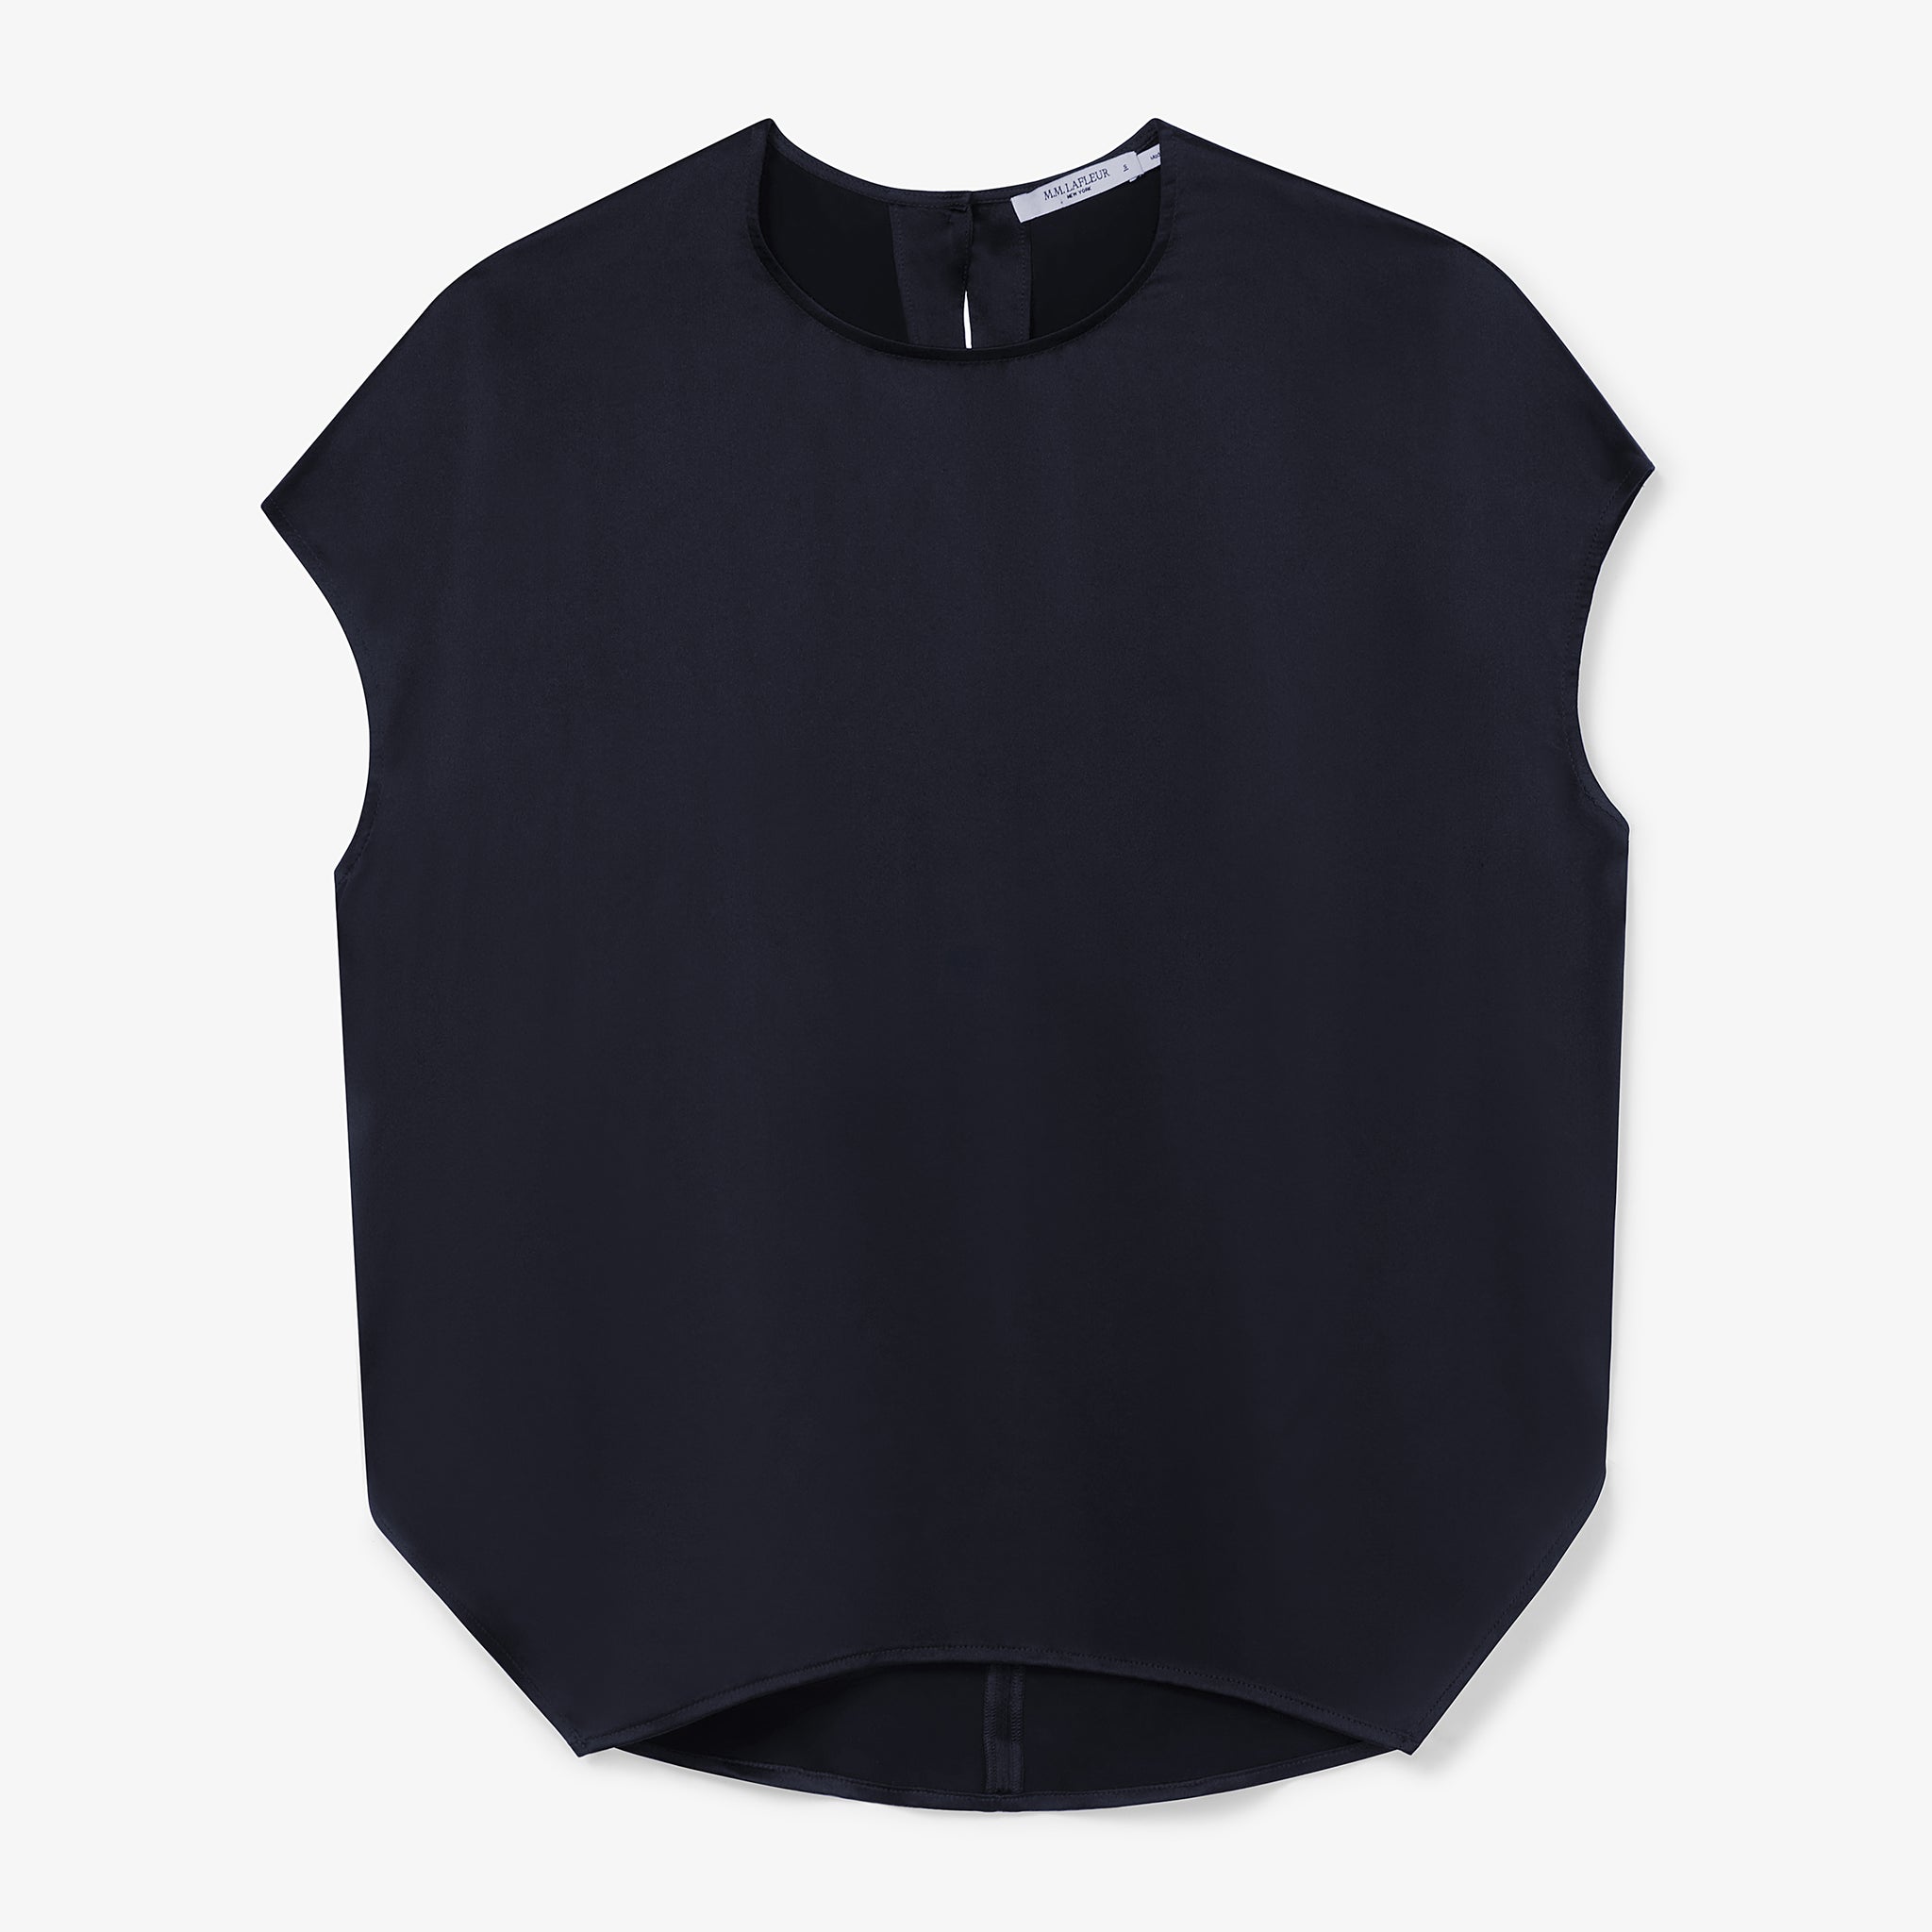 Packshot image of the Didion Top in Galaxy Blue